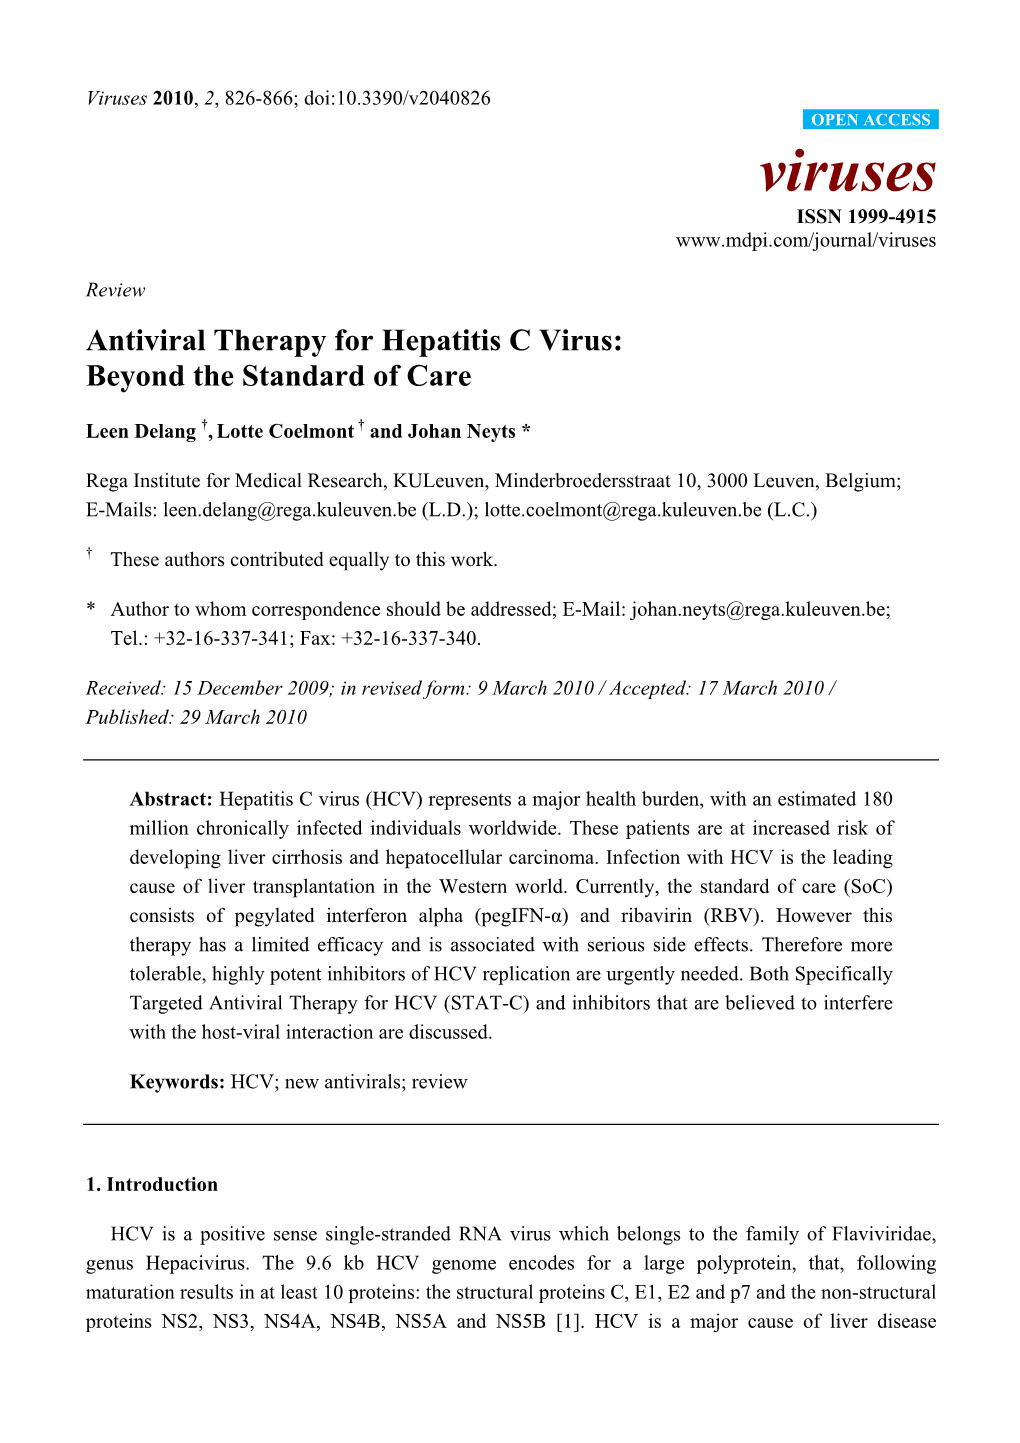 Antiviral Therapy for Hepatitis C Virus: Beyond the Standard of Care